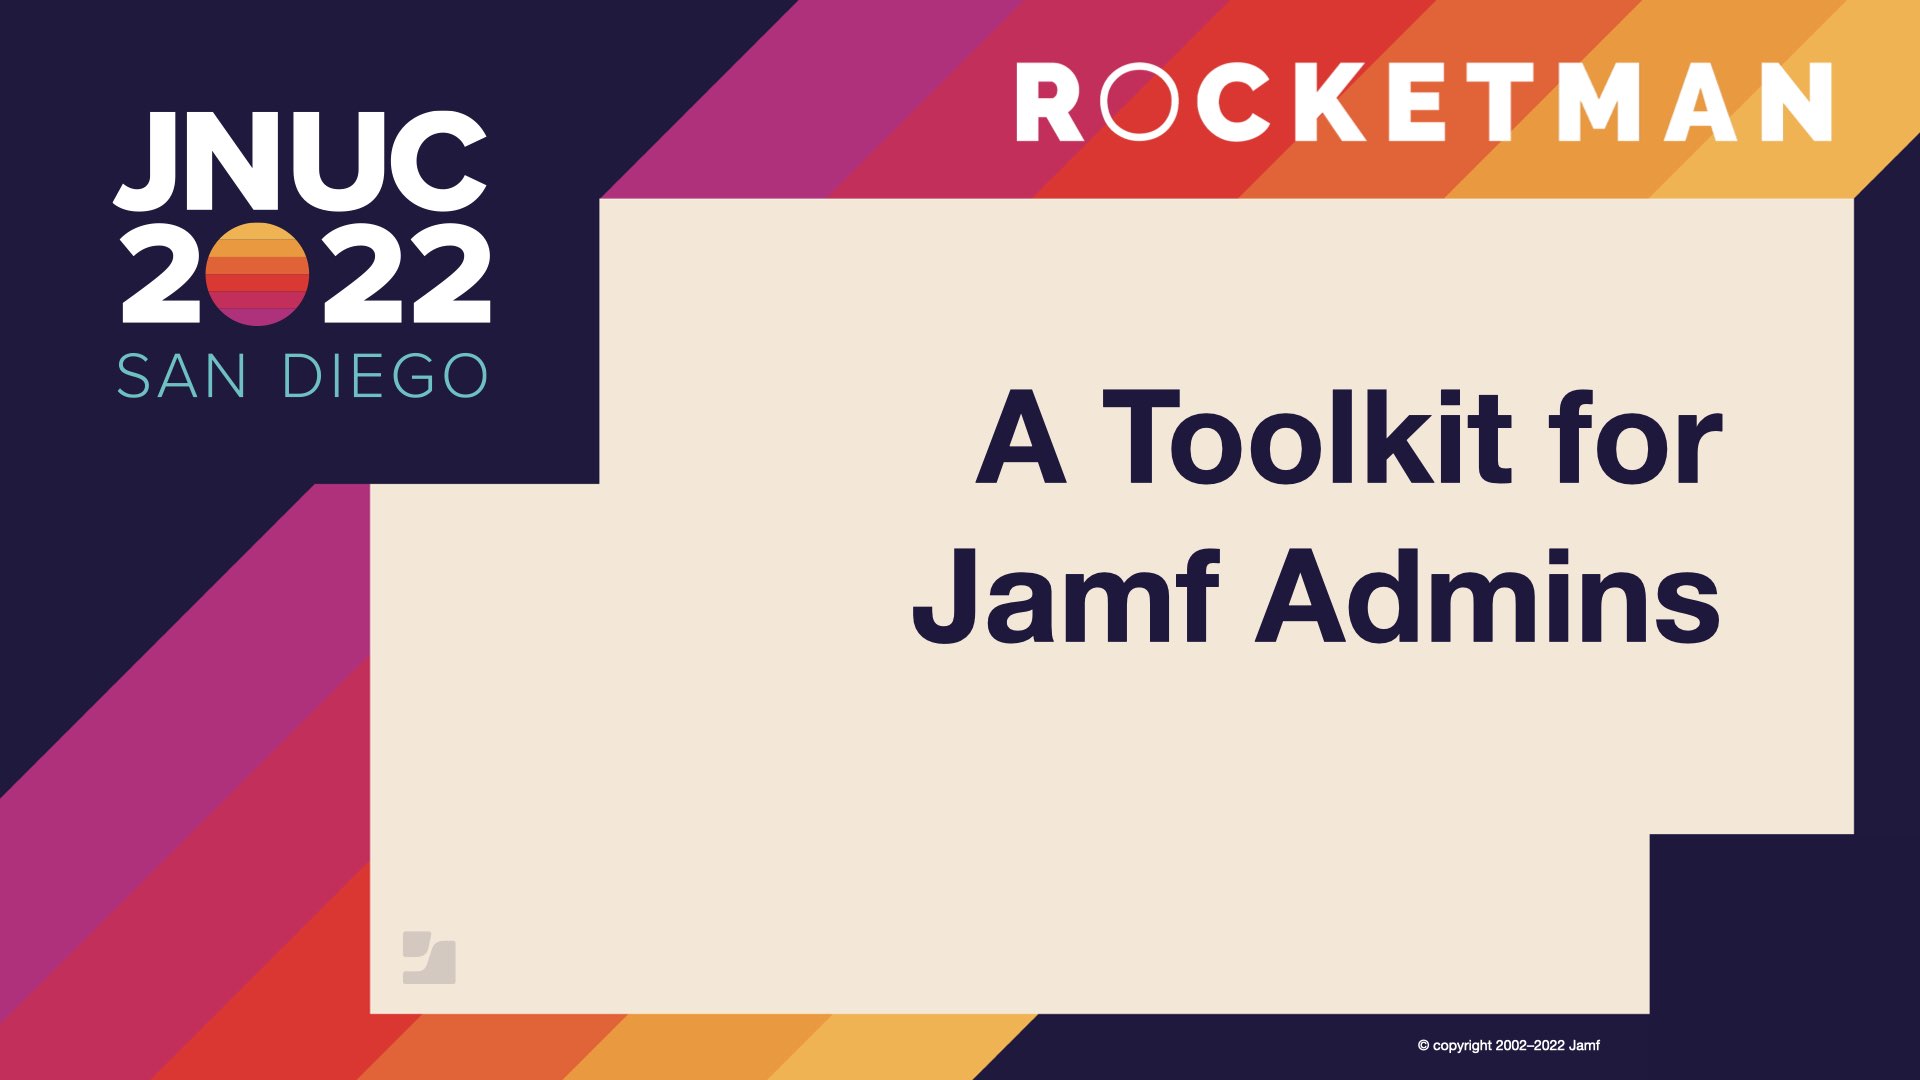 A toolkit for Jamf admins